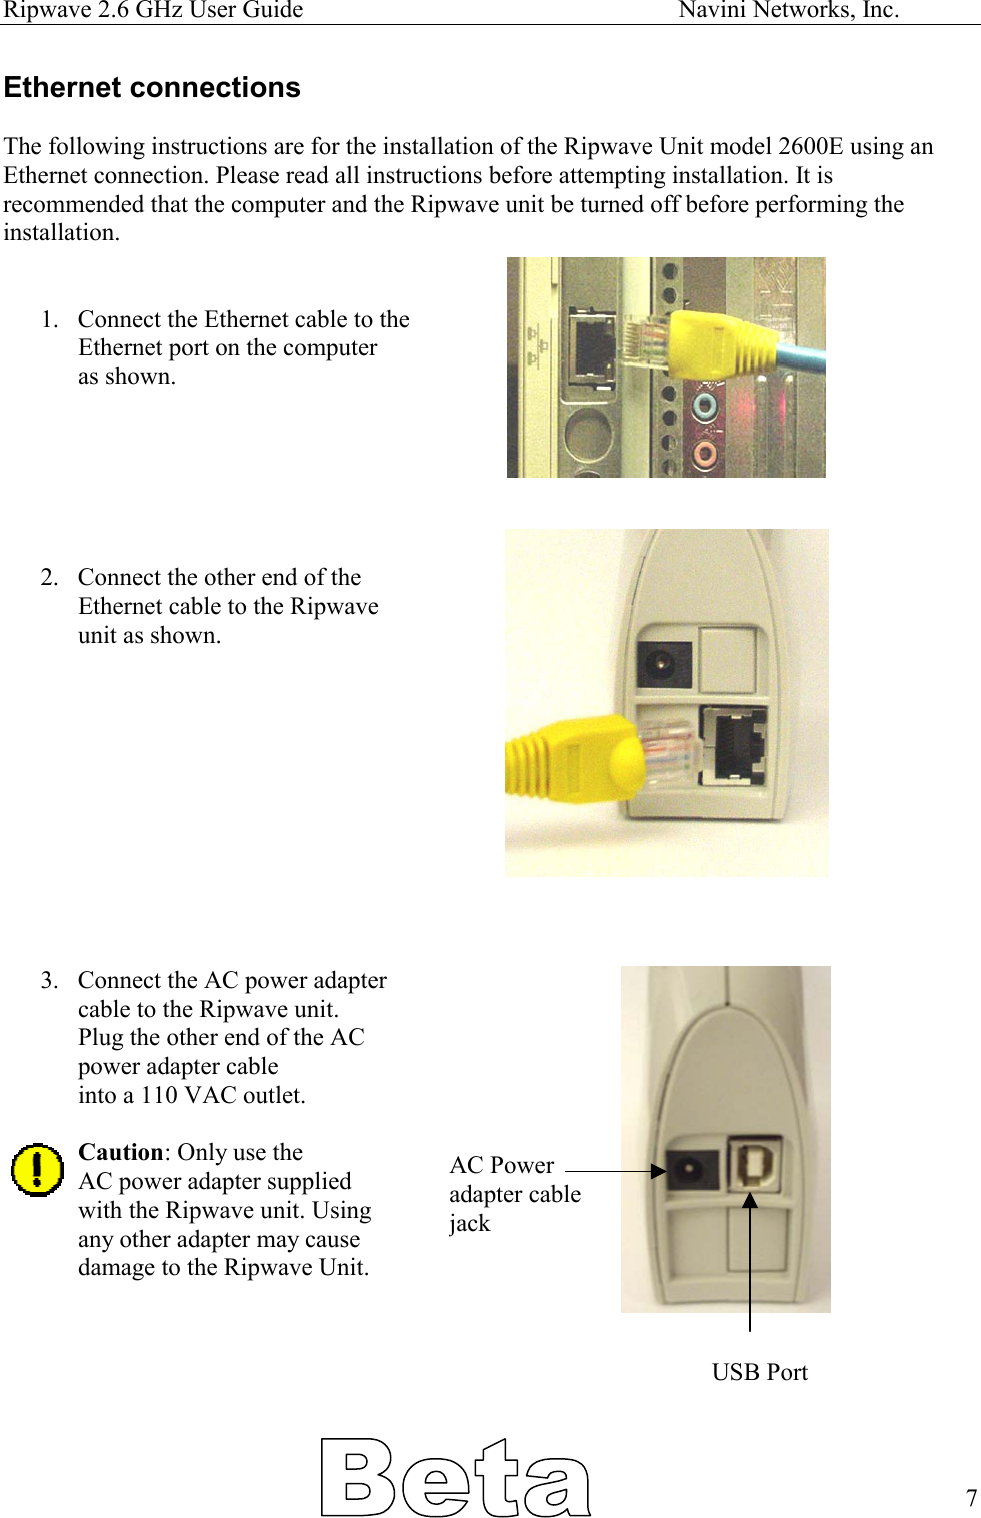 Ripwave 2.6 GHz User Guide                                                            Navini Networks, Inc. Ethernet connections  The following instructions are for the installation of the Ripwave Unit model 2600E using an Ethernet connection. Please read all instructions before attempting installation. It is recommended that the computer and the Ripwave unit be turned off before performing the installation.   1.  Connect the Ethernet cable to the Ethernet port on the computer as shown.       2.  Connect the other end of the  Ethernet cable to the Ripwave unit as shown.            3.  Connect the AC power adapter  cable to the Ripwave unit.  Plug the other end of the AC  power adapter cable  into a 110 VAC outlet.  Caution: Only use the AC power adapter supplied  with the Ripwave unit. Using any other adapter may cause damage to the Ripwave Unit. AC Power  adapter cable  jack    USB Port      7